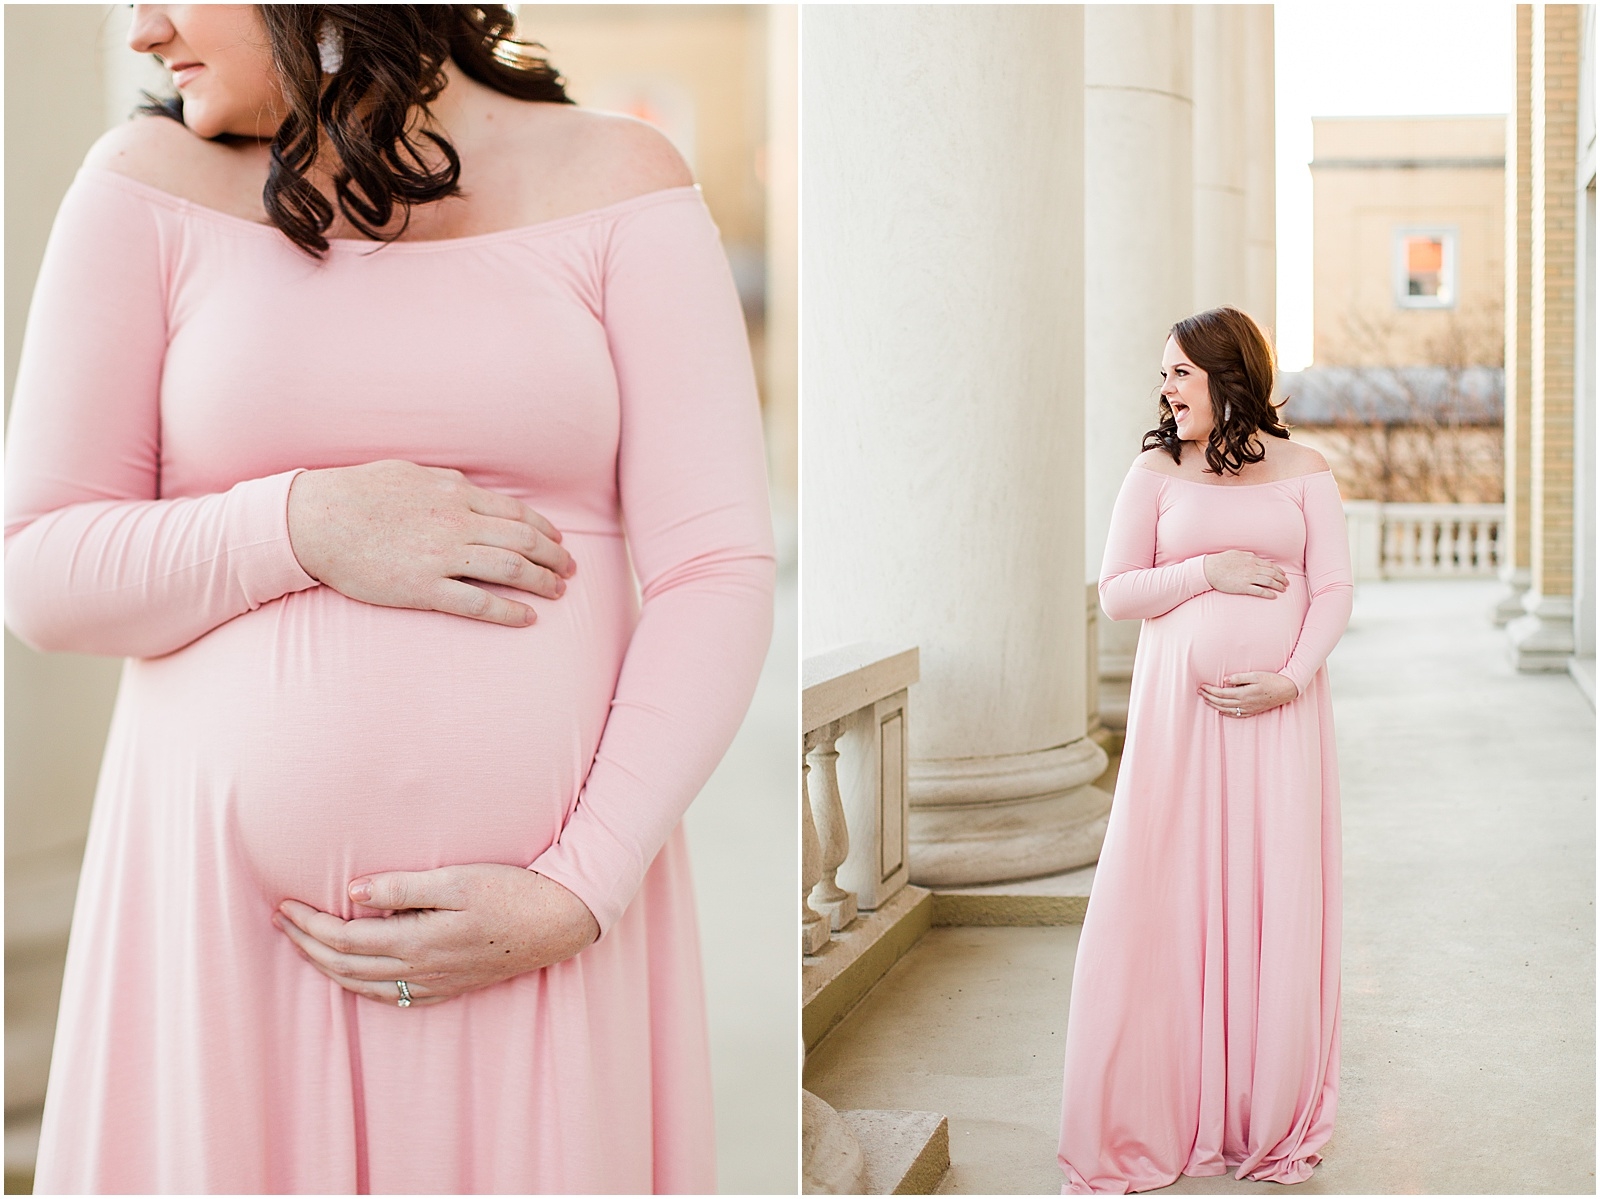 A Downtown Owensboro Maternity Session | Kayla and Grant Evansville Indiana Wedding Photographers-0018.jpg